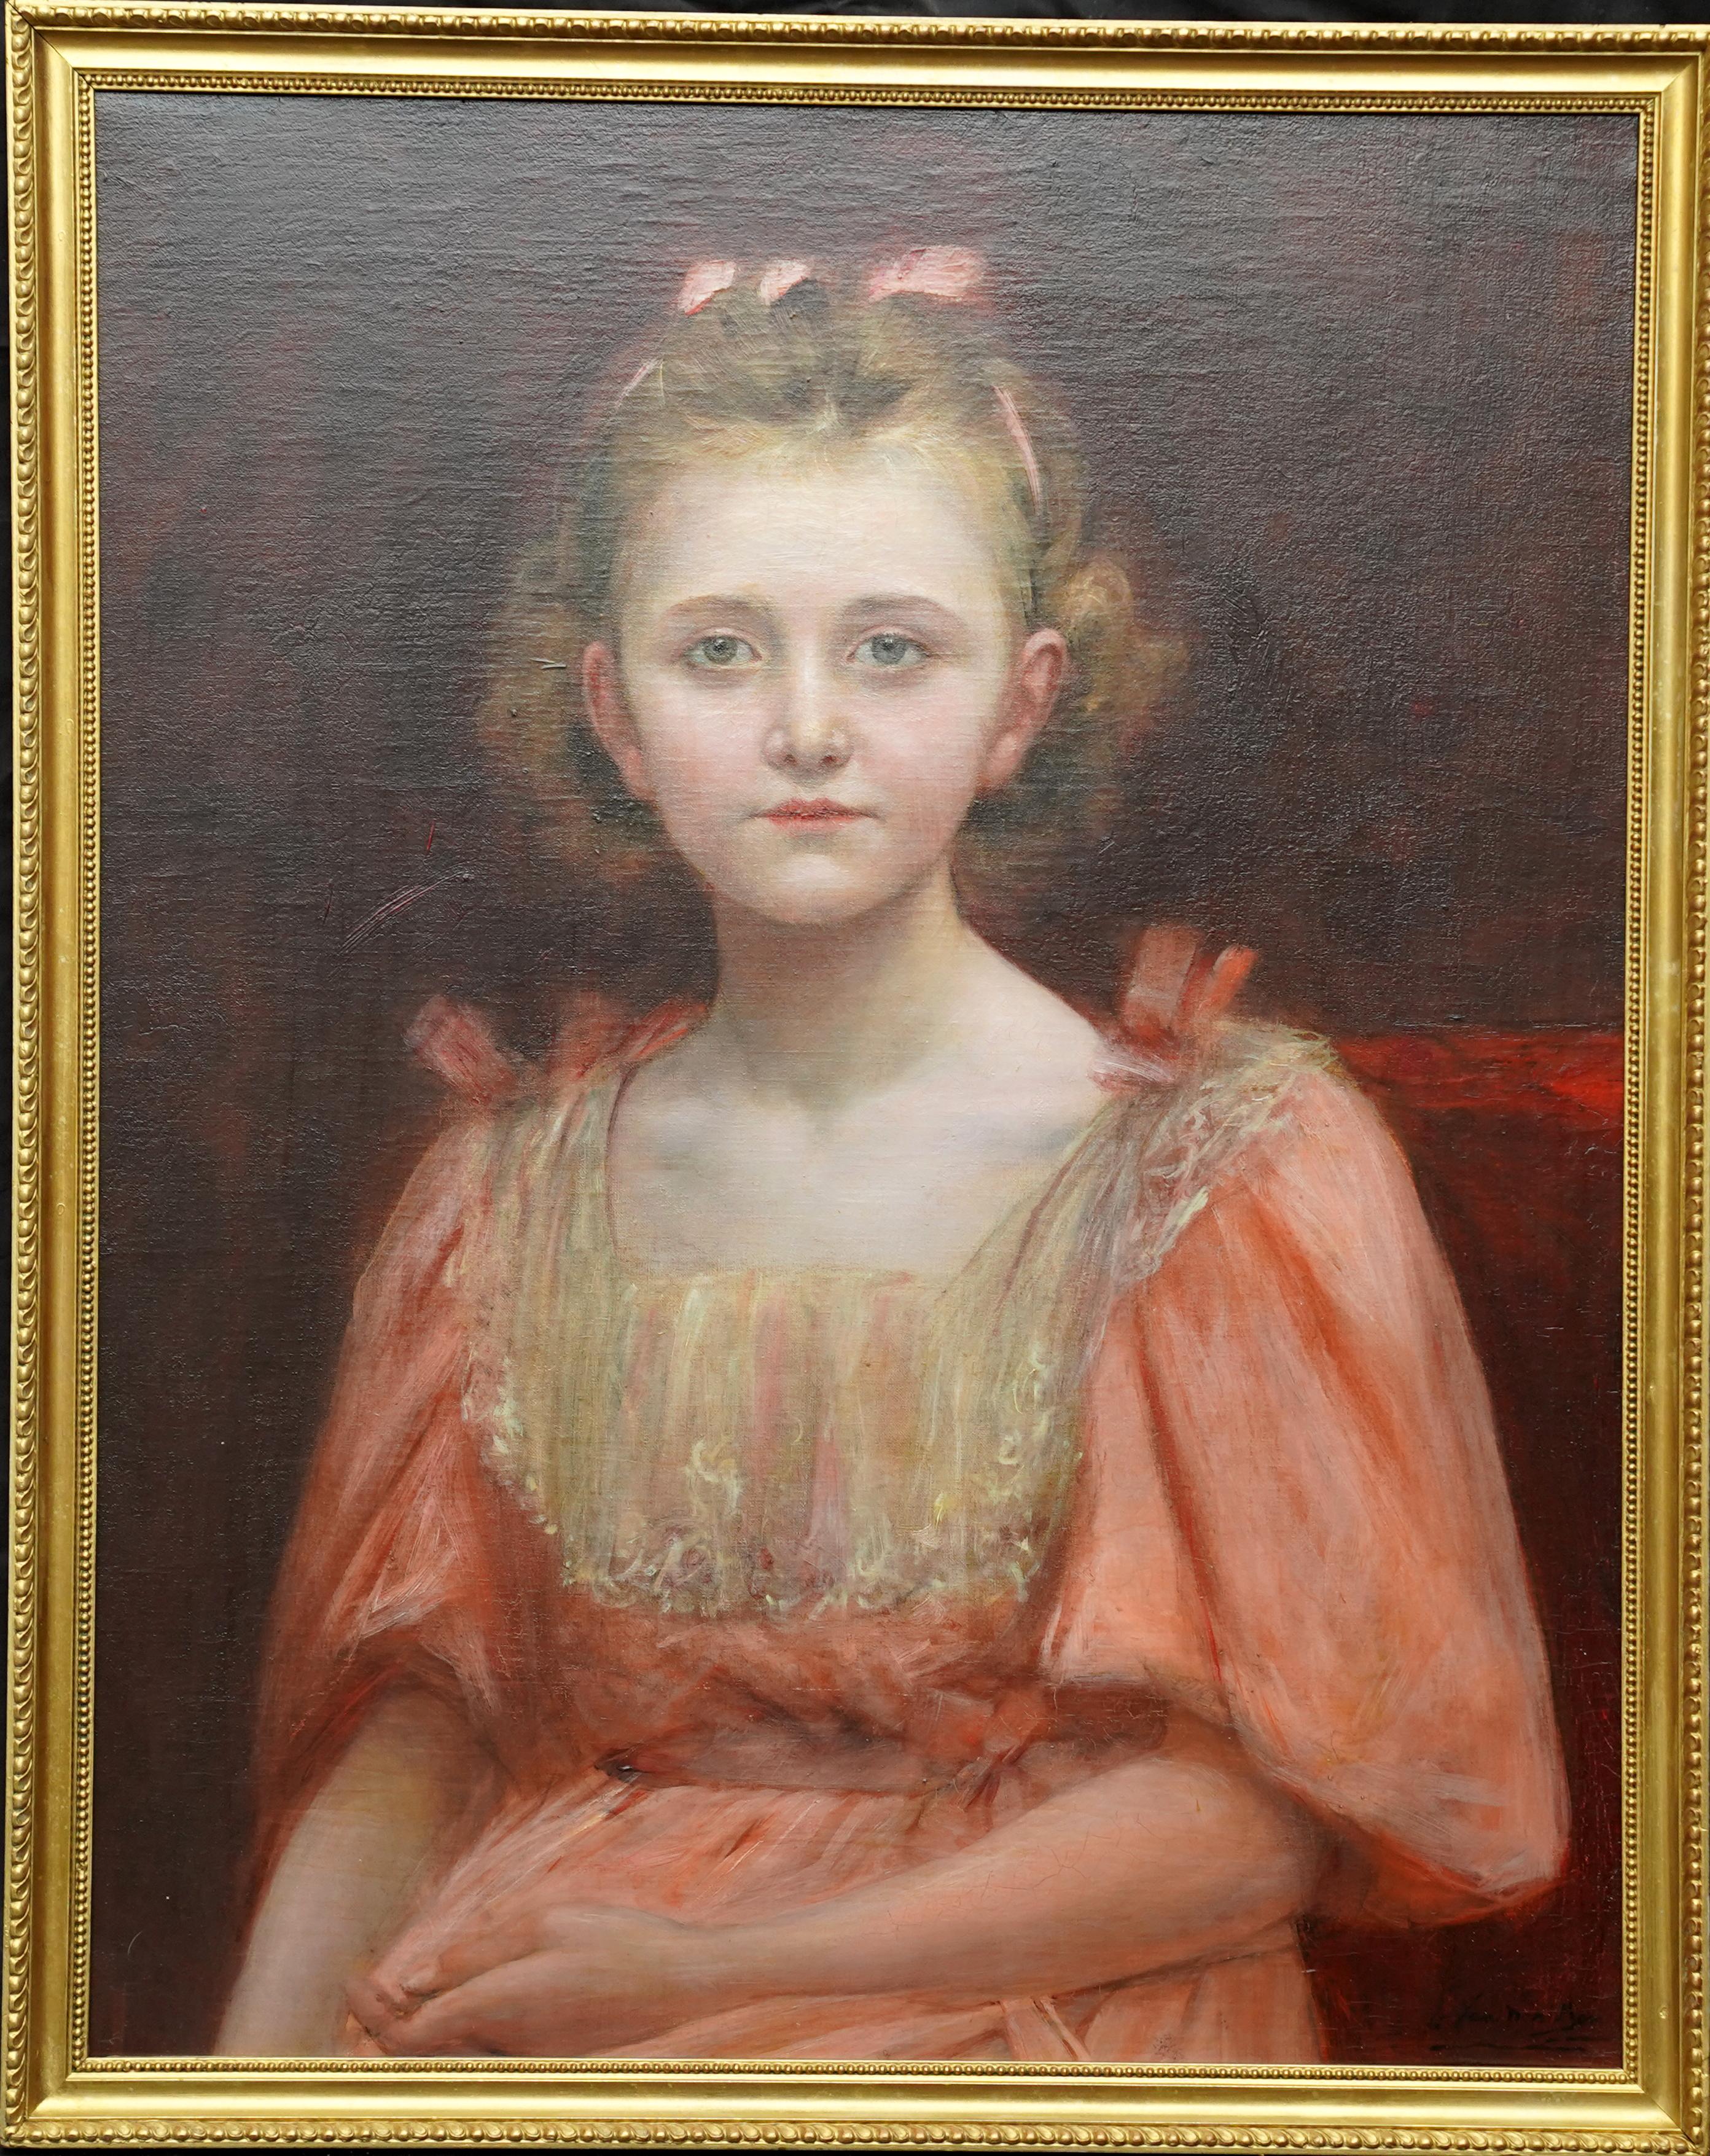 Georges Van Den Bos Portrait Painting - Portrait of a Young Girl in Peach Dress - Edwardian art oil painting